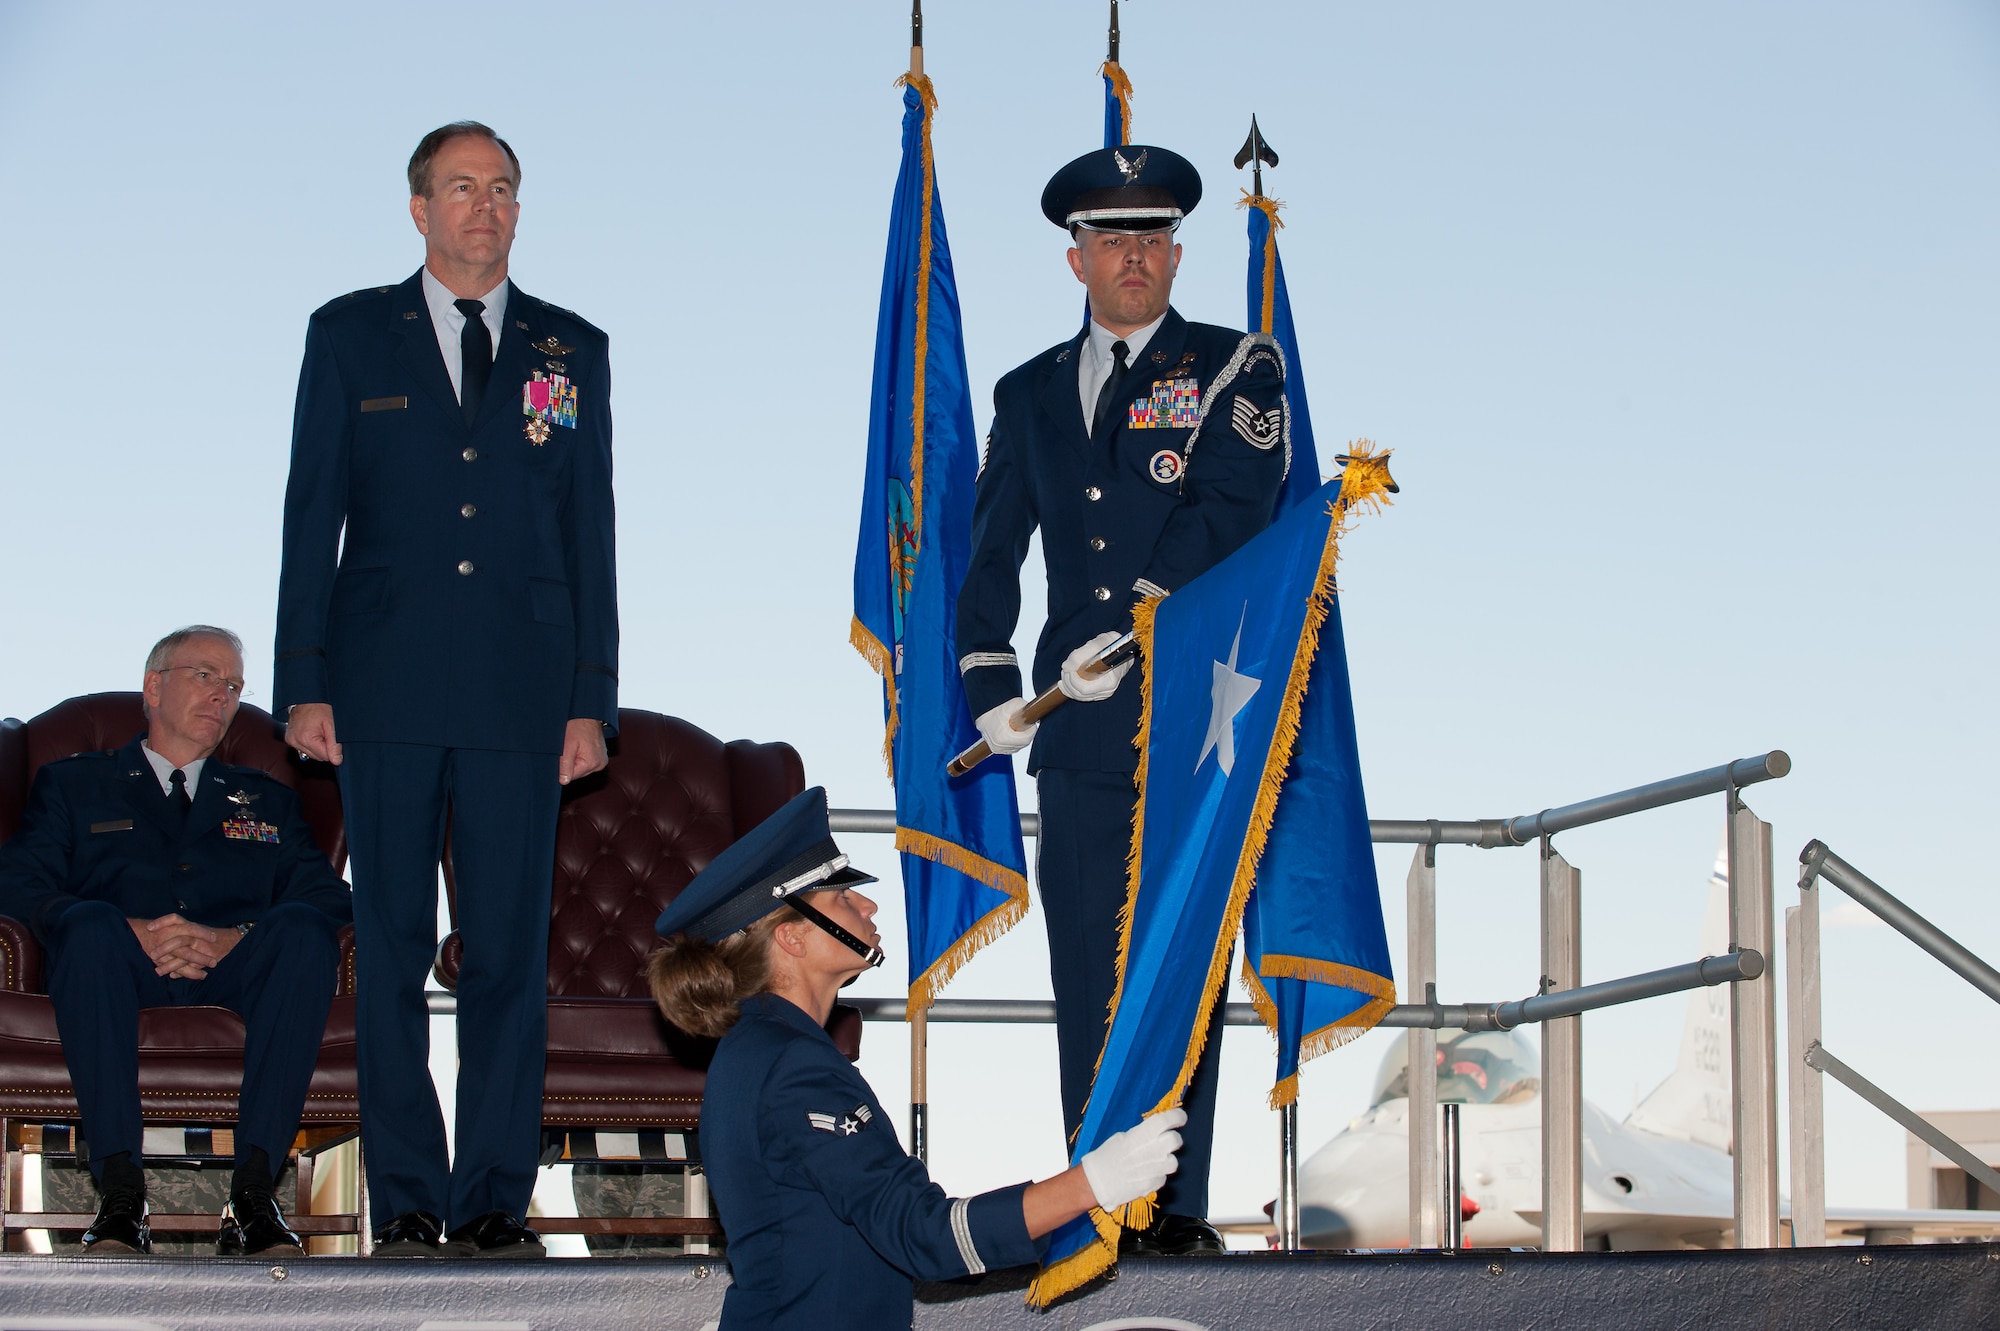 Brig. Gen. Richard L. Martin stands at attention as the 140th Wing Color Guard unfurls his one-star flag during Martin's promotion ceremony at Buckley Air Force Base, Colo., Sept. 10. Martin is assuming command of the Colorado Air National Guard and the position of Assistant Adjutant General - Air. (U.S. Air Force photo/Master Sgt. John Nimmo, Sr.) (RELEASED)